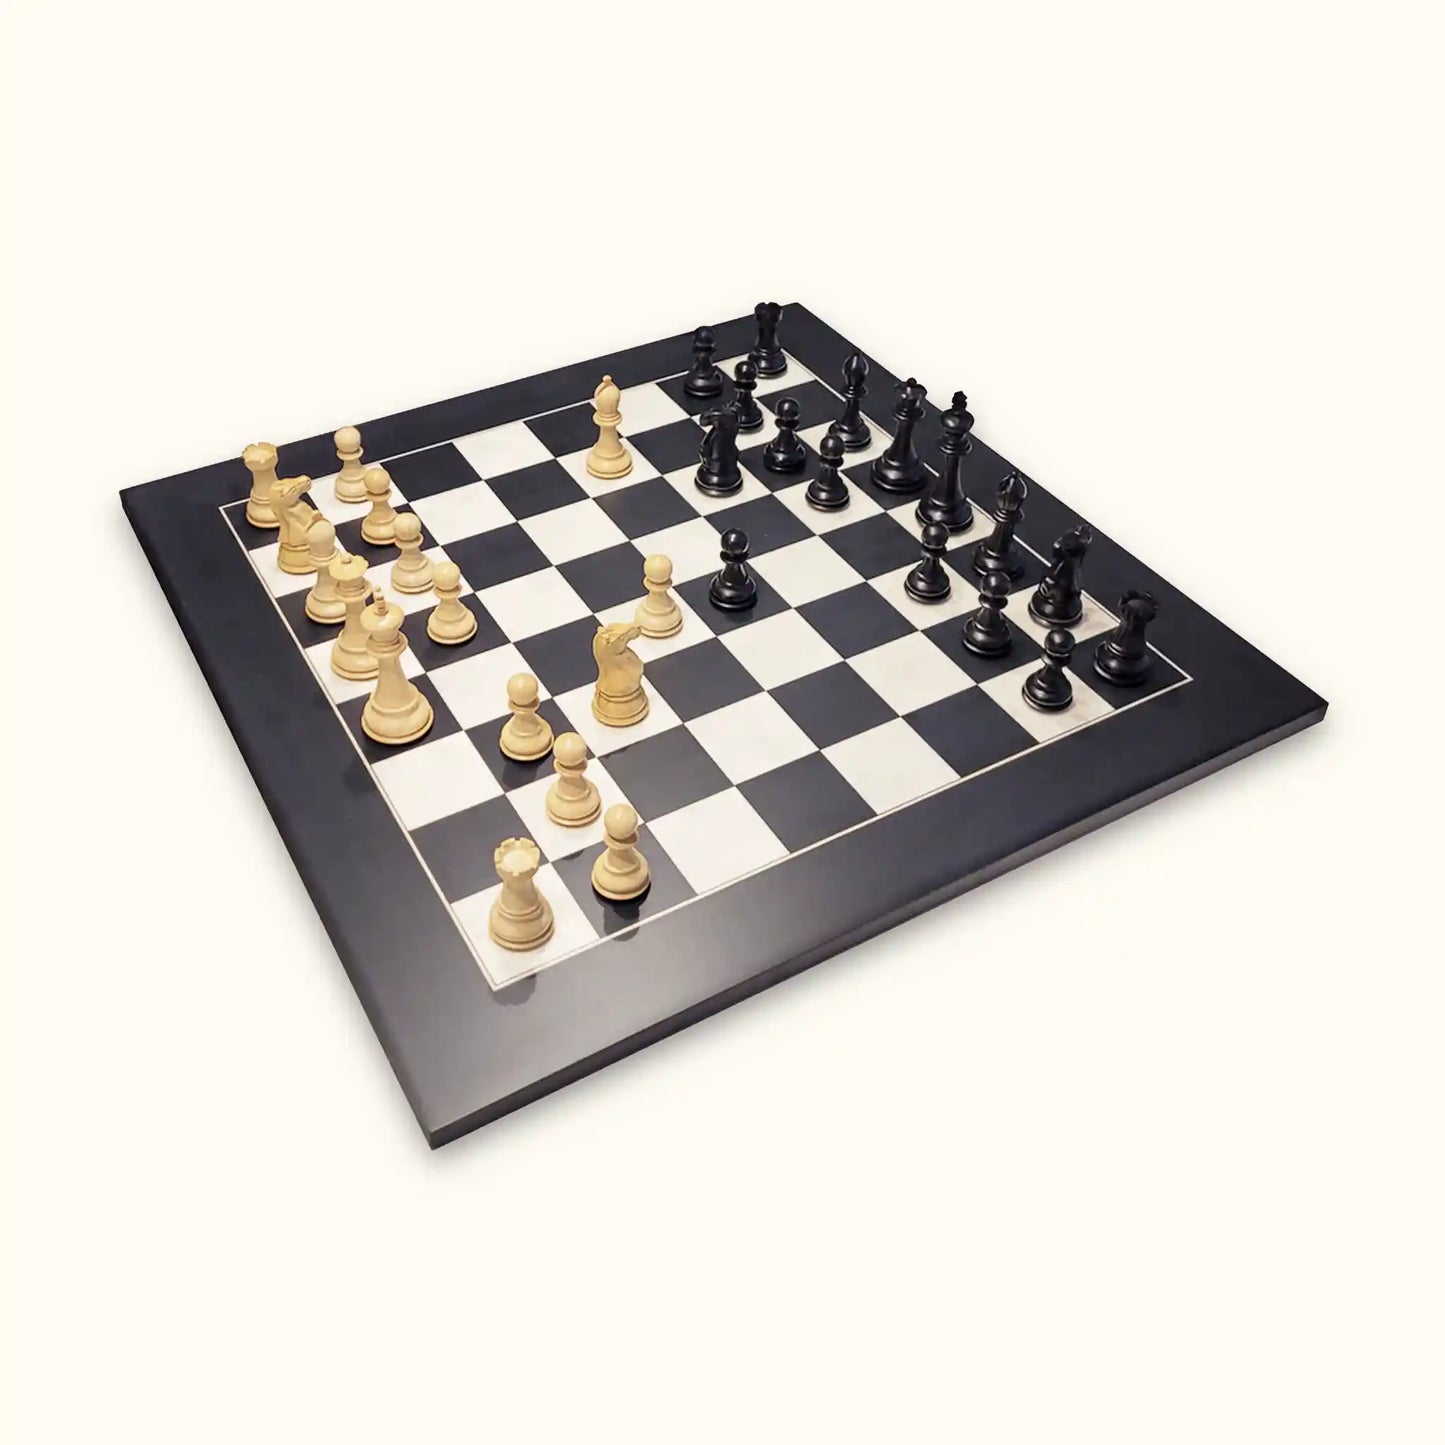 Chess pieces spassky black on black chessboard diagonal